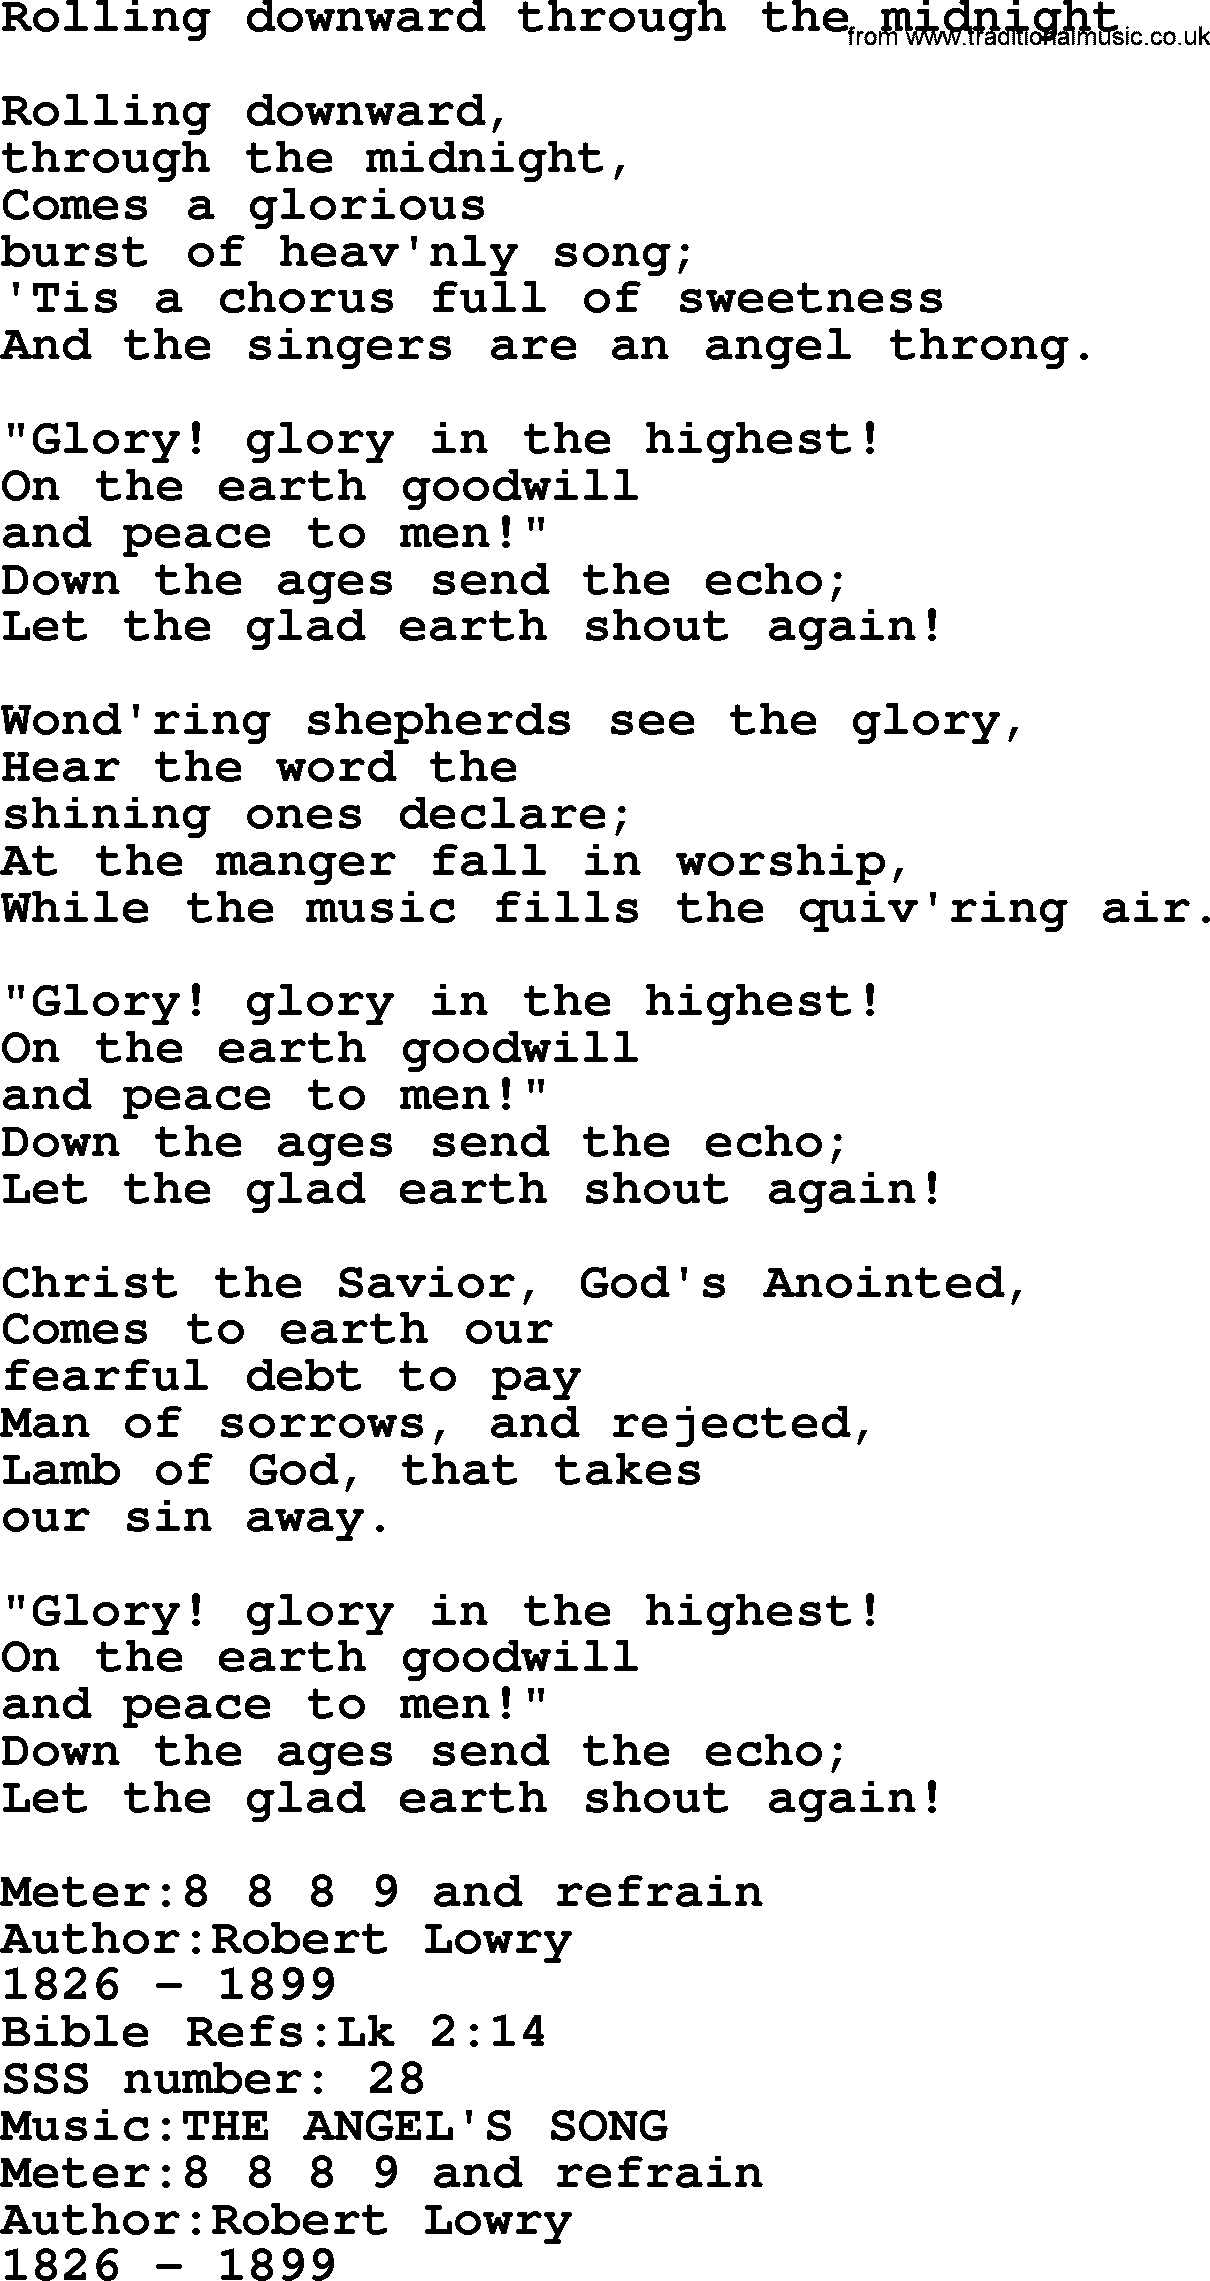 Sacred Songs and Solos complete, 1200 Hymns, title: Rolling Downward Through The Midnight, lyrics and PDF